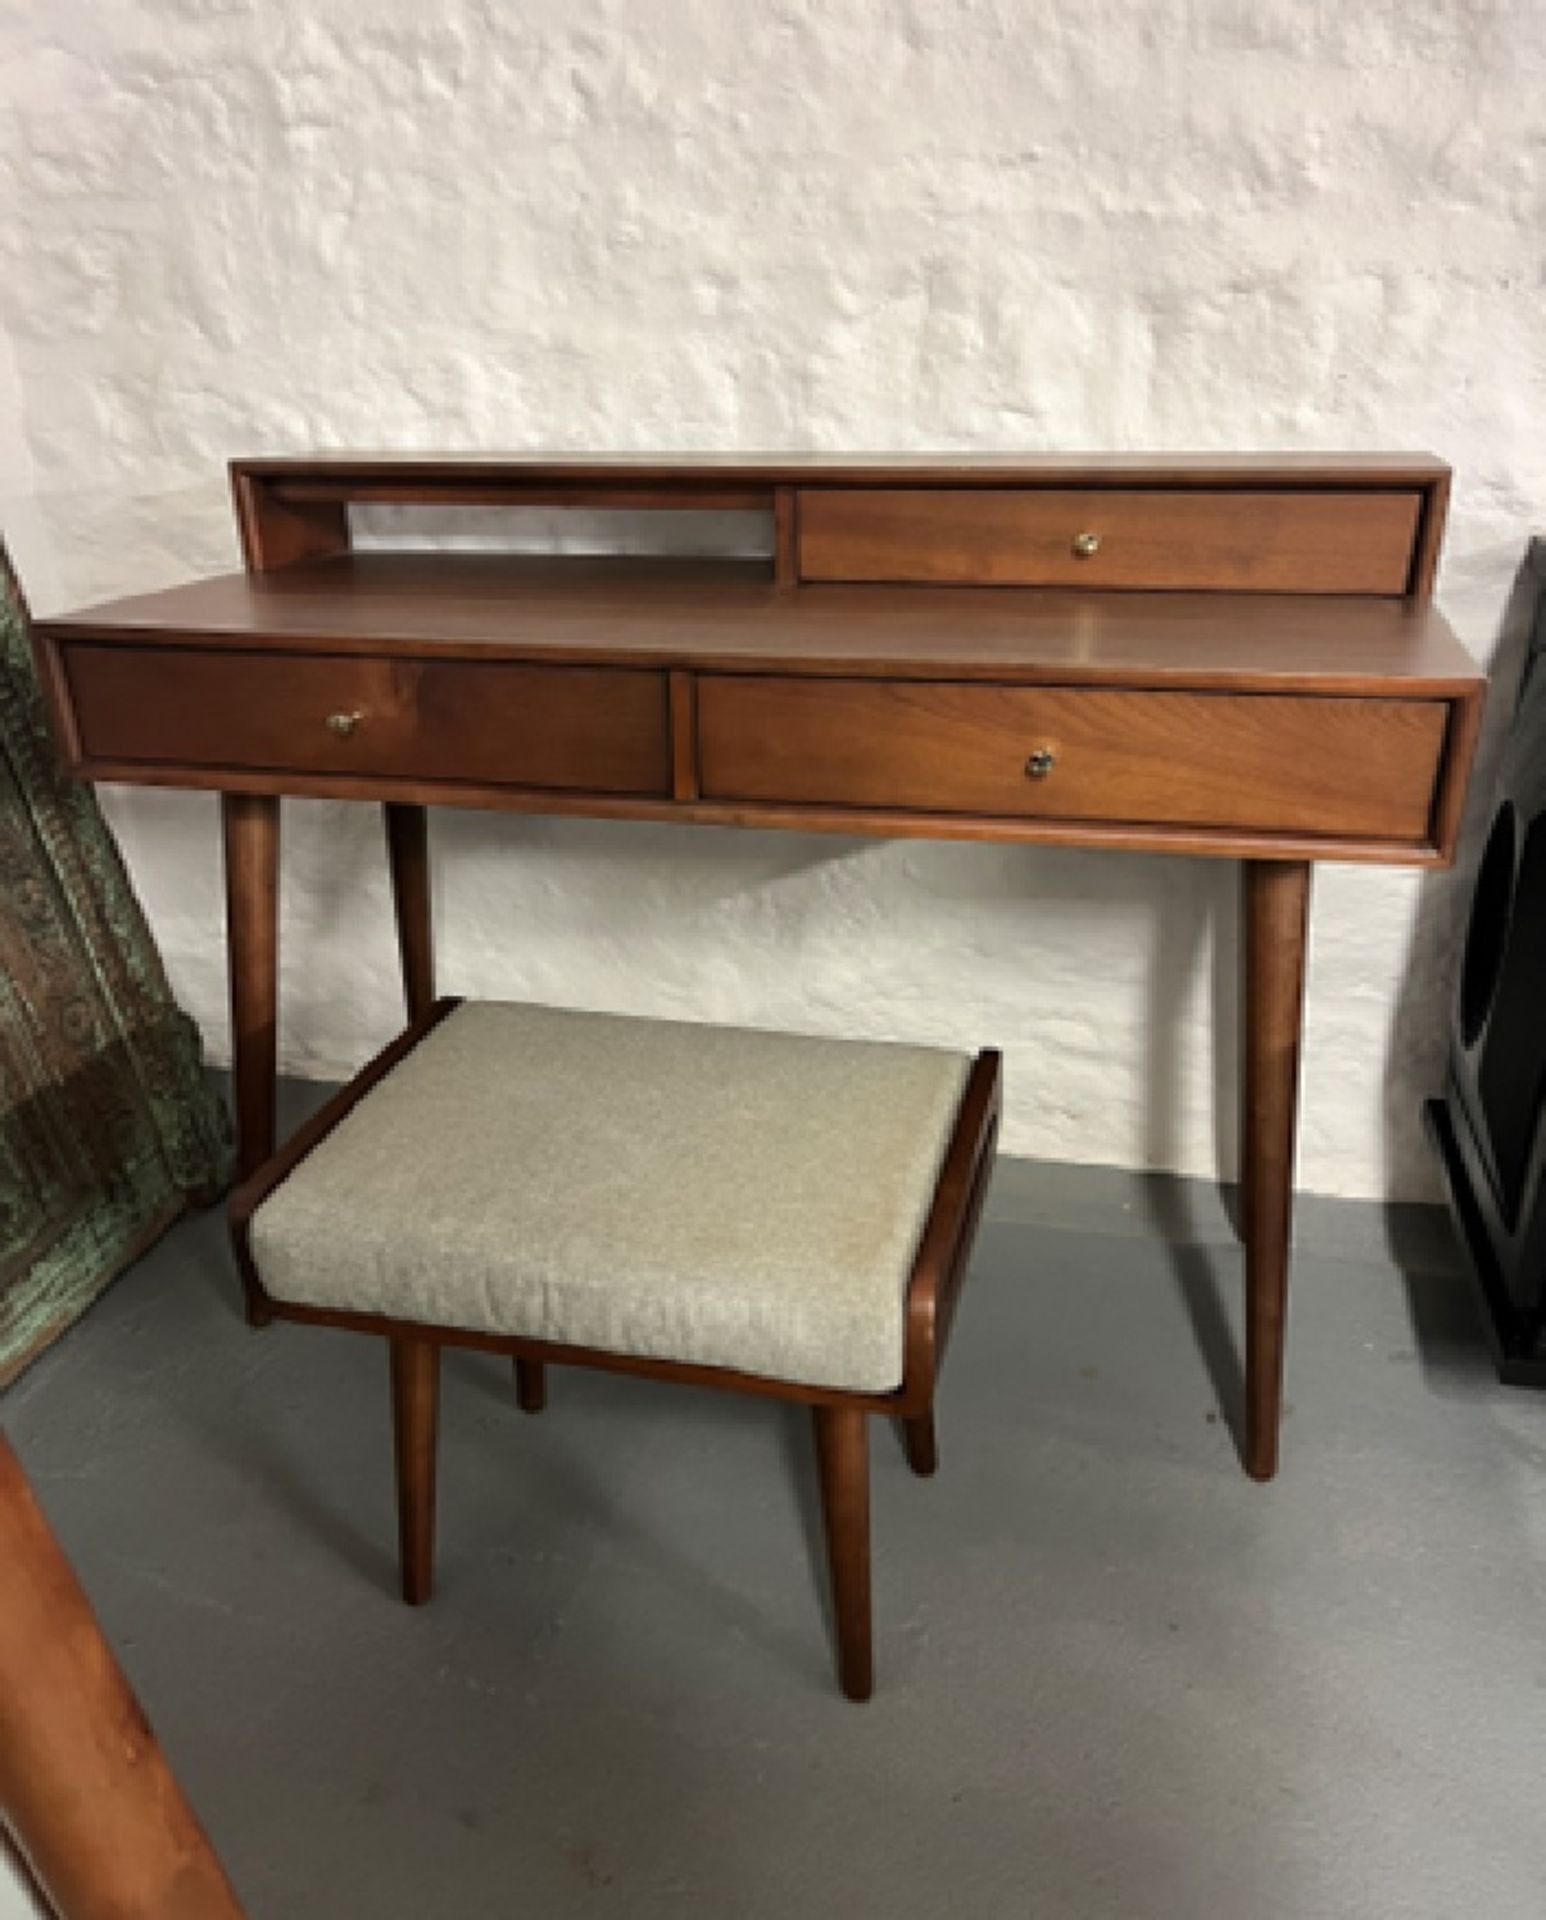 Bailey Desk and Stool Stylish deep brown tones and a smooth finish make this dressing table/desk